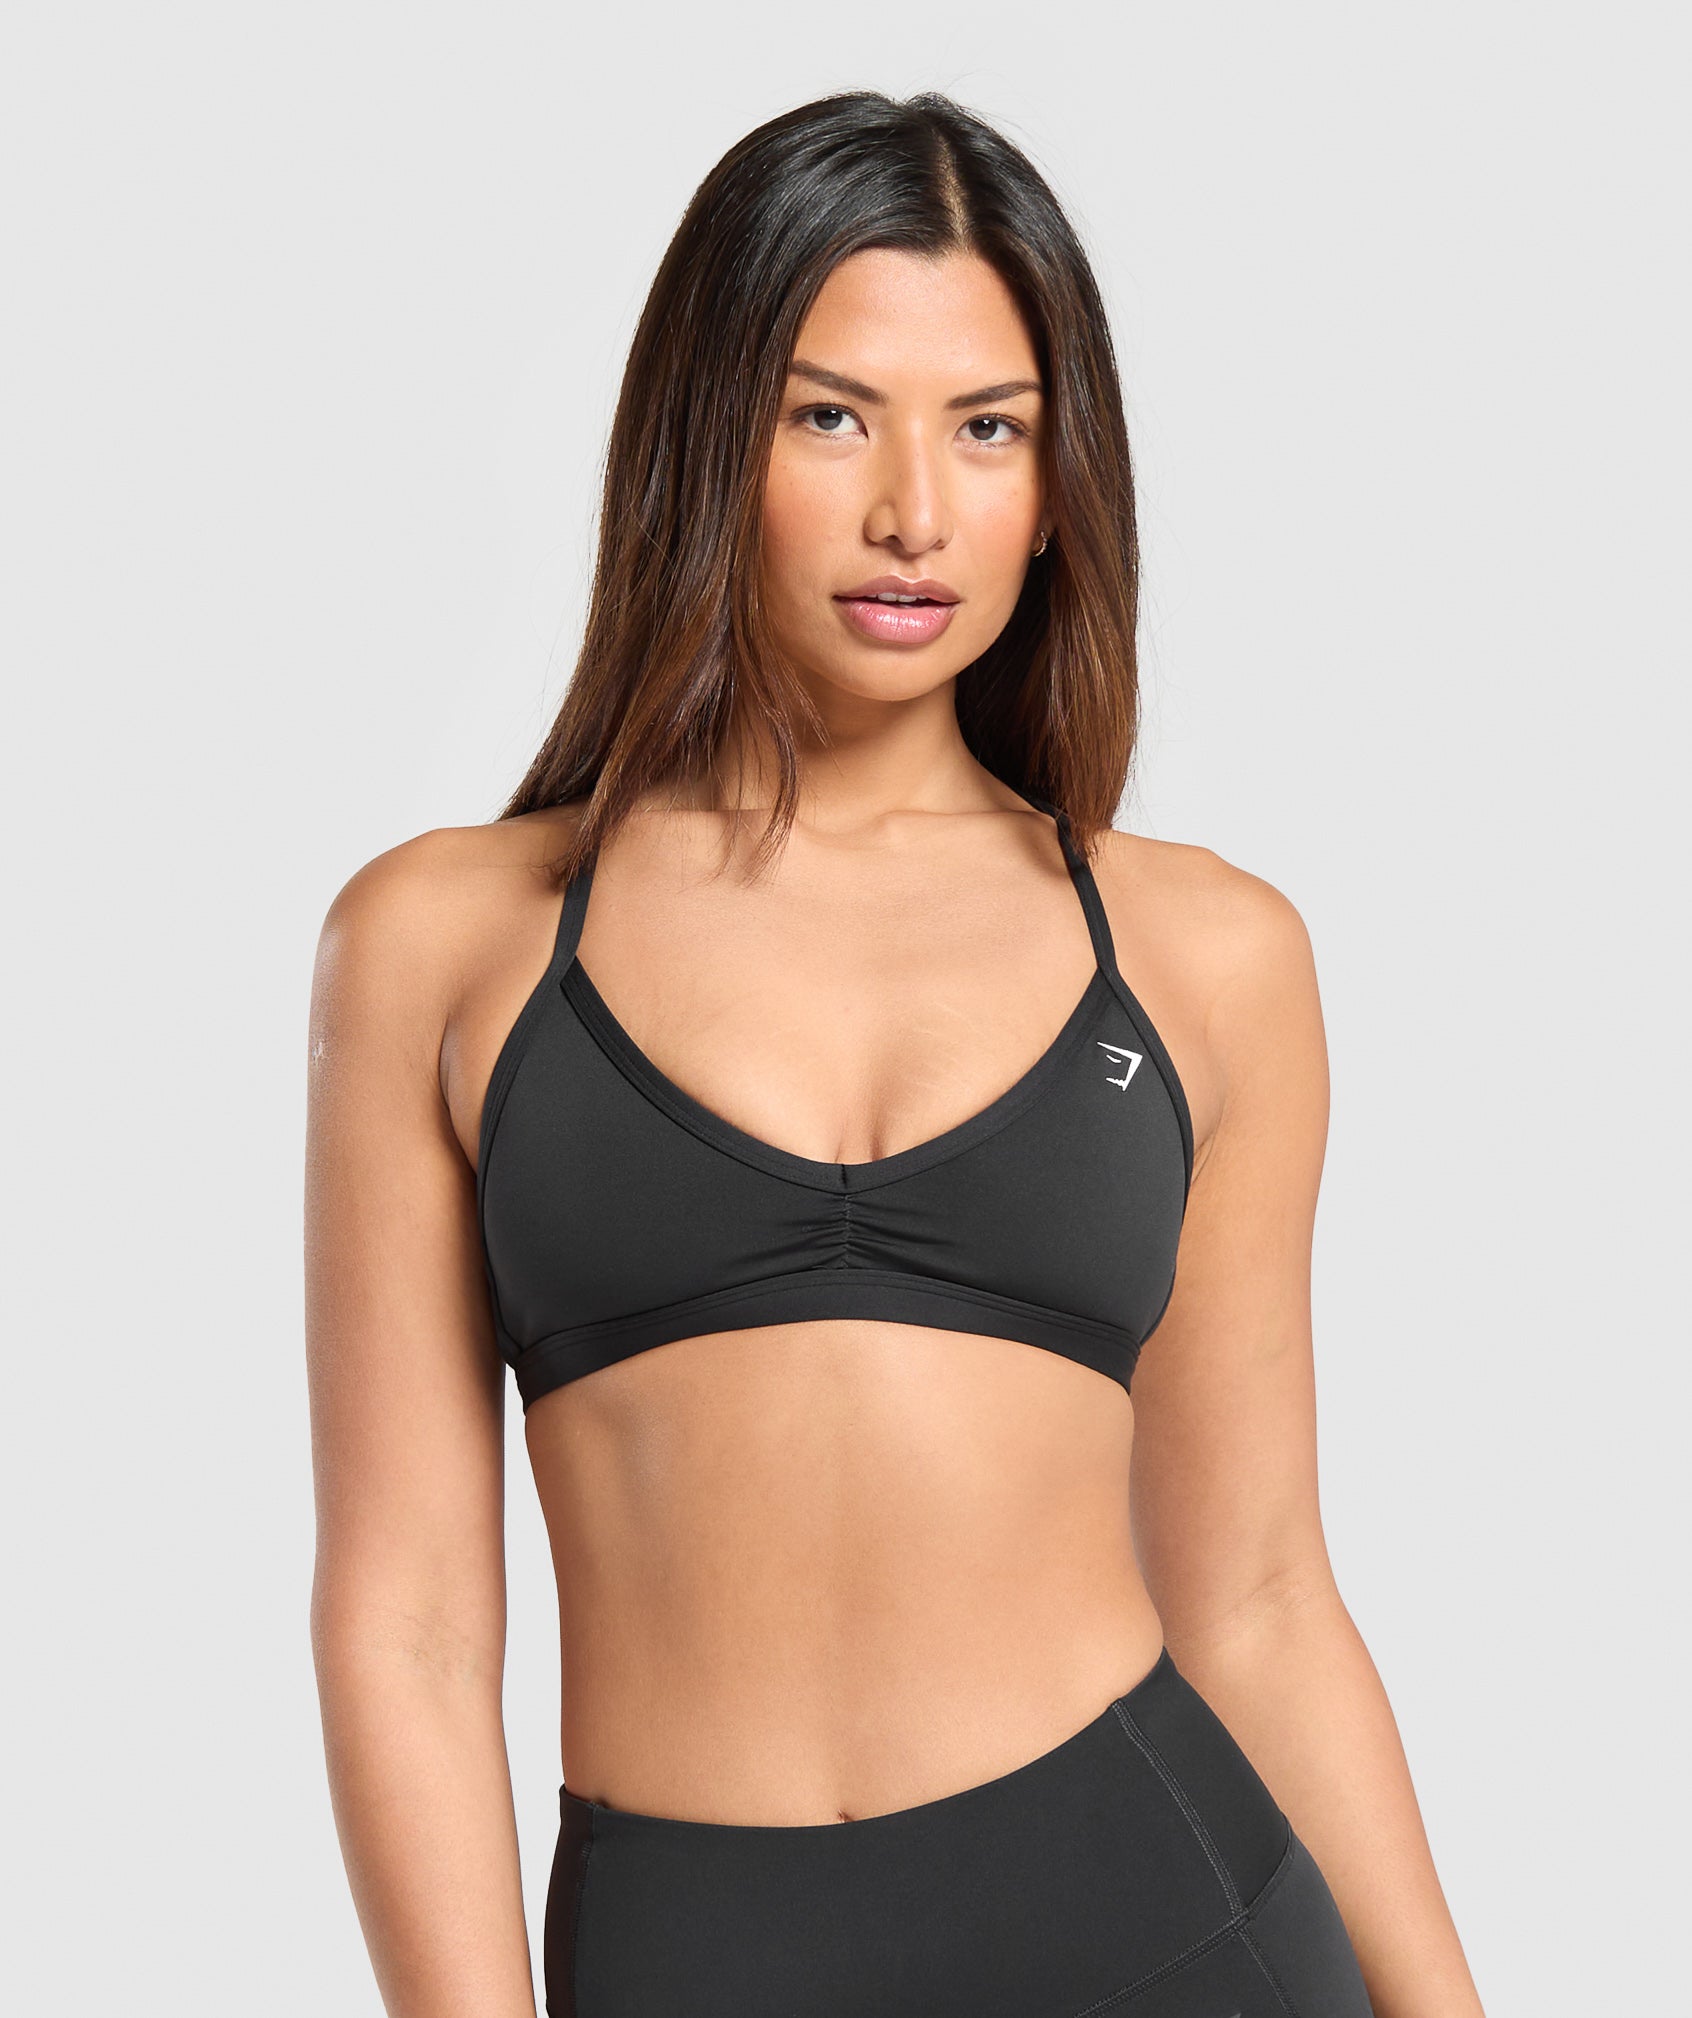 Minimal Sports Bra in Black is out of stock